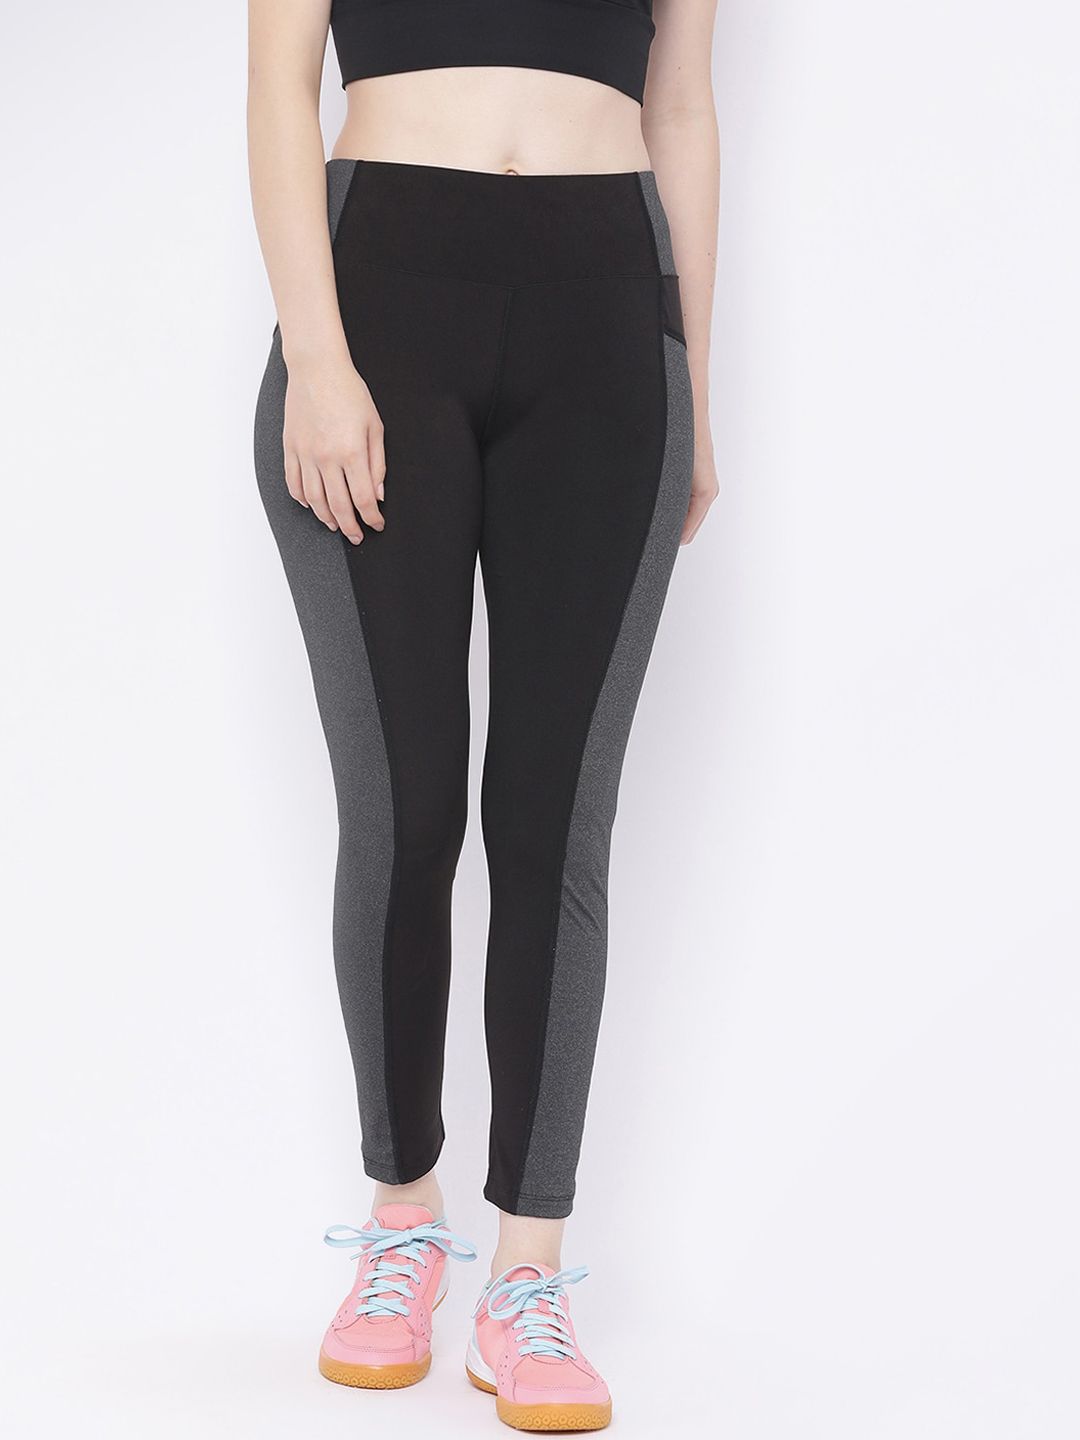 Chkokko Women Grey Solid Slim-Fit Gym Tights Price in India